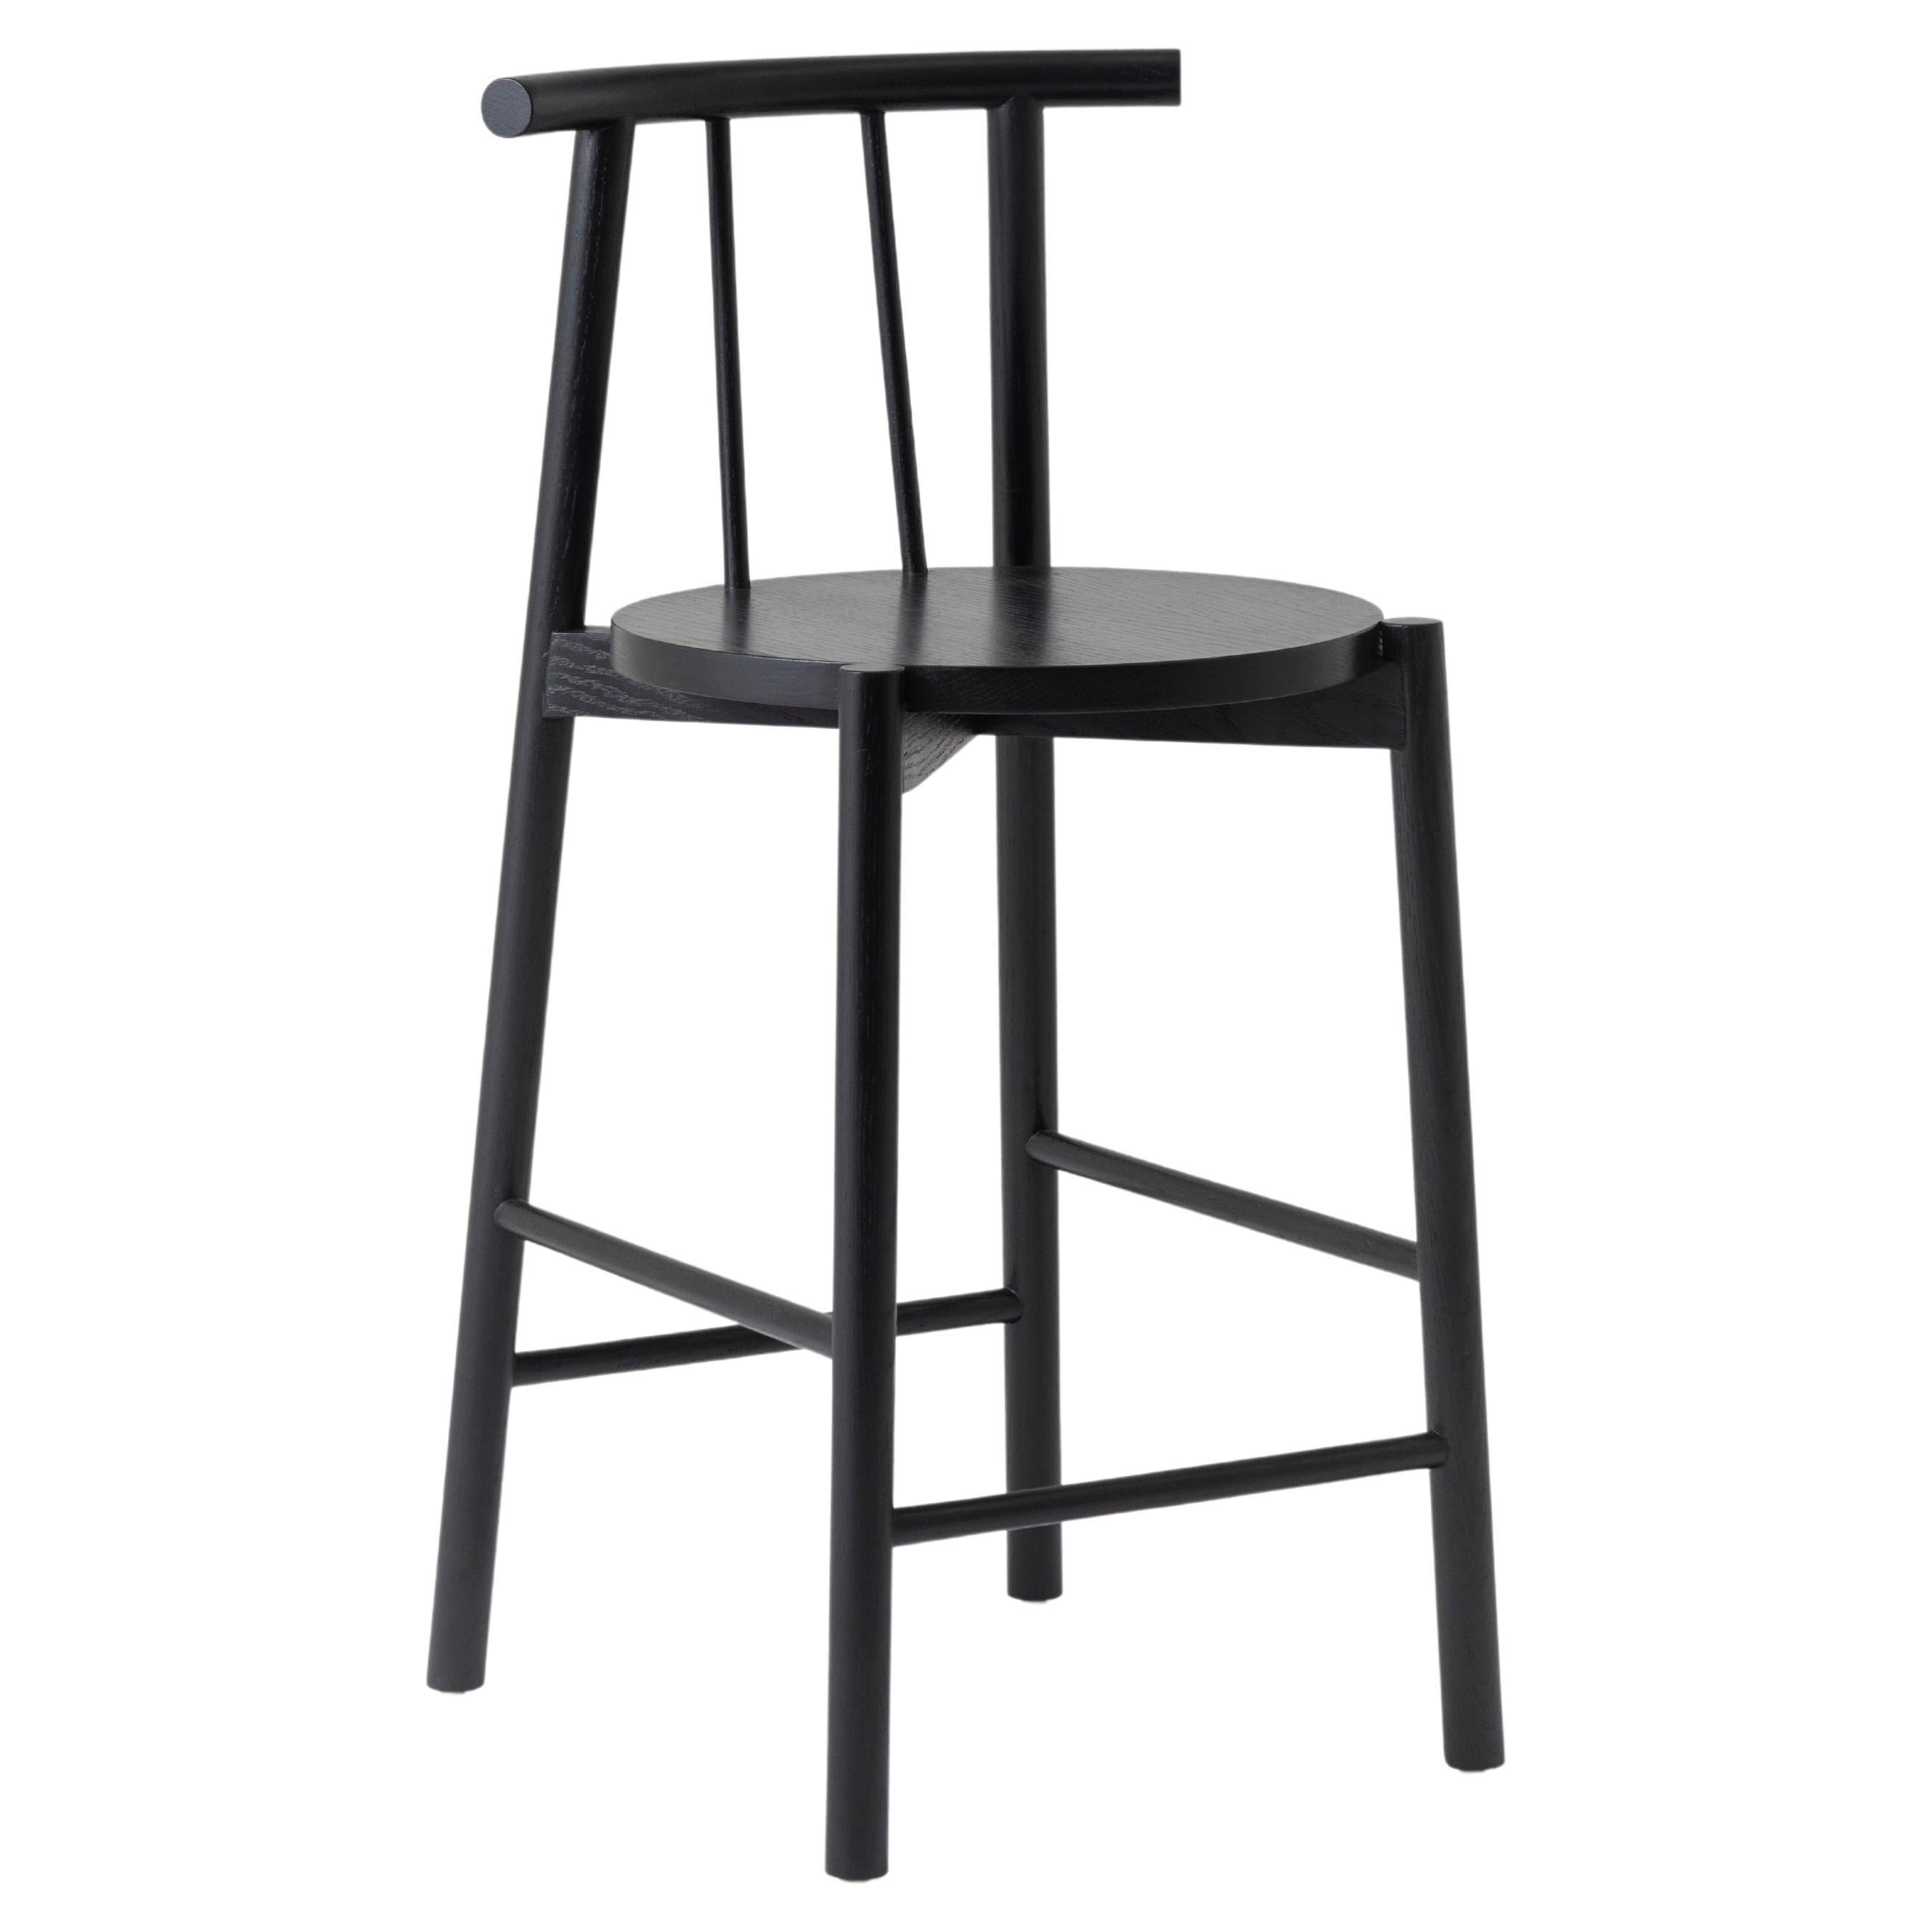 Black Stool Crafted in Solid Oak Wood